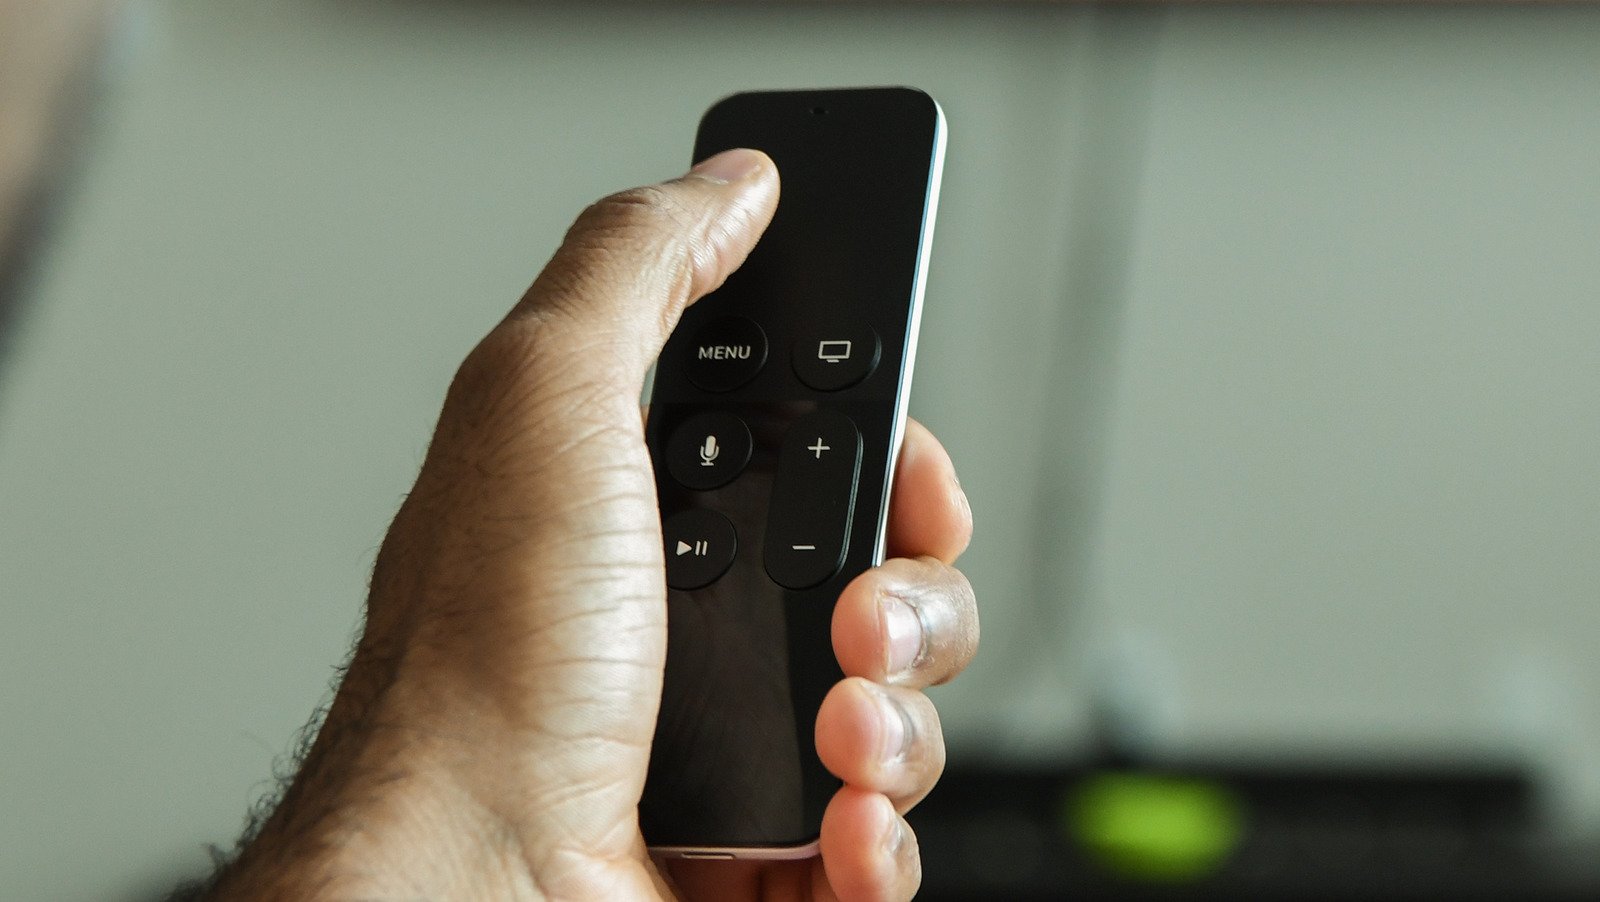 Free Apps Every Apple TV User Should Have Installed